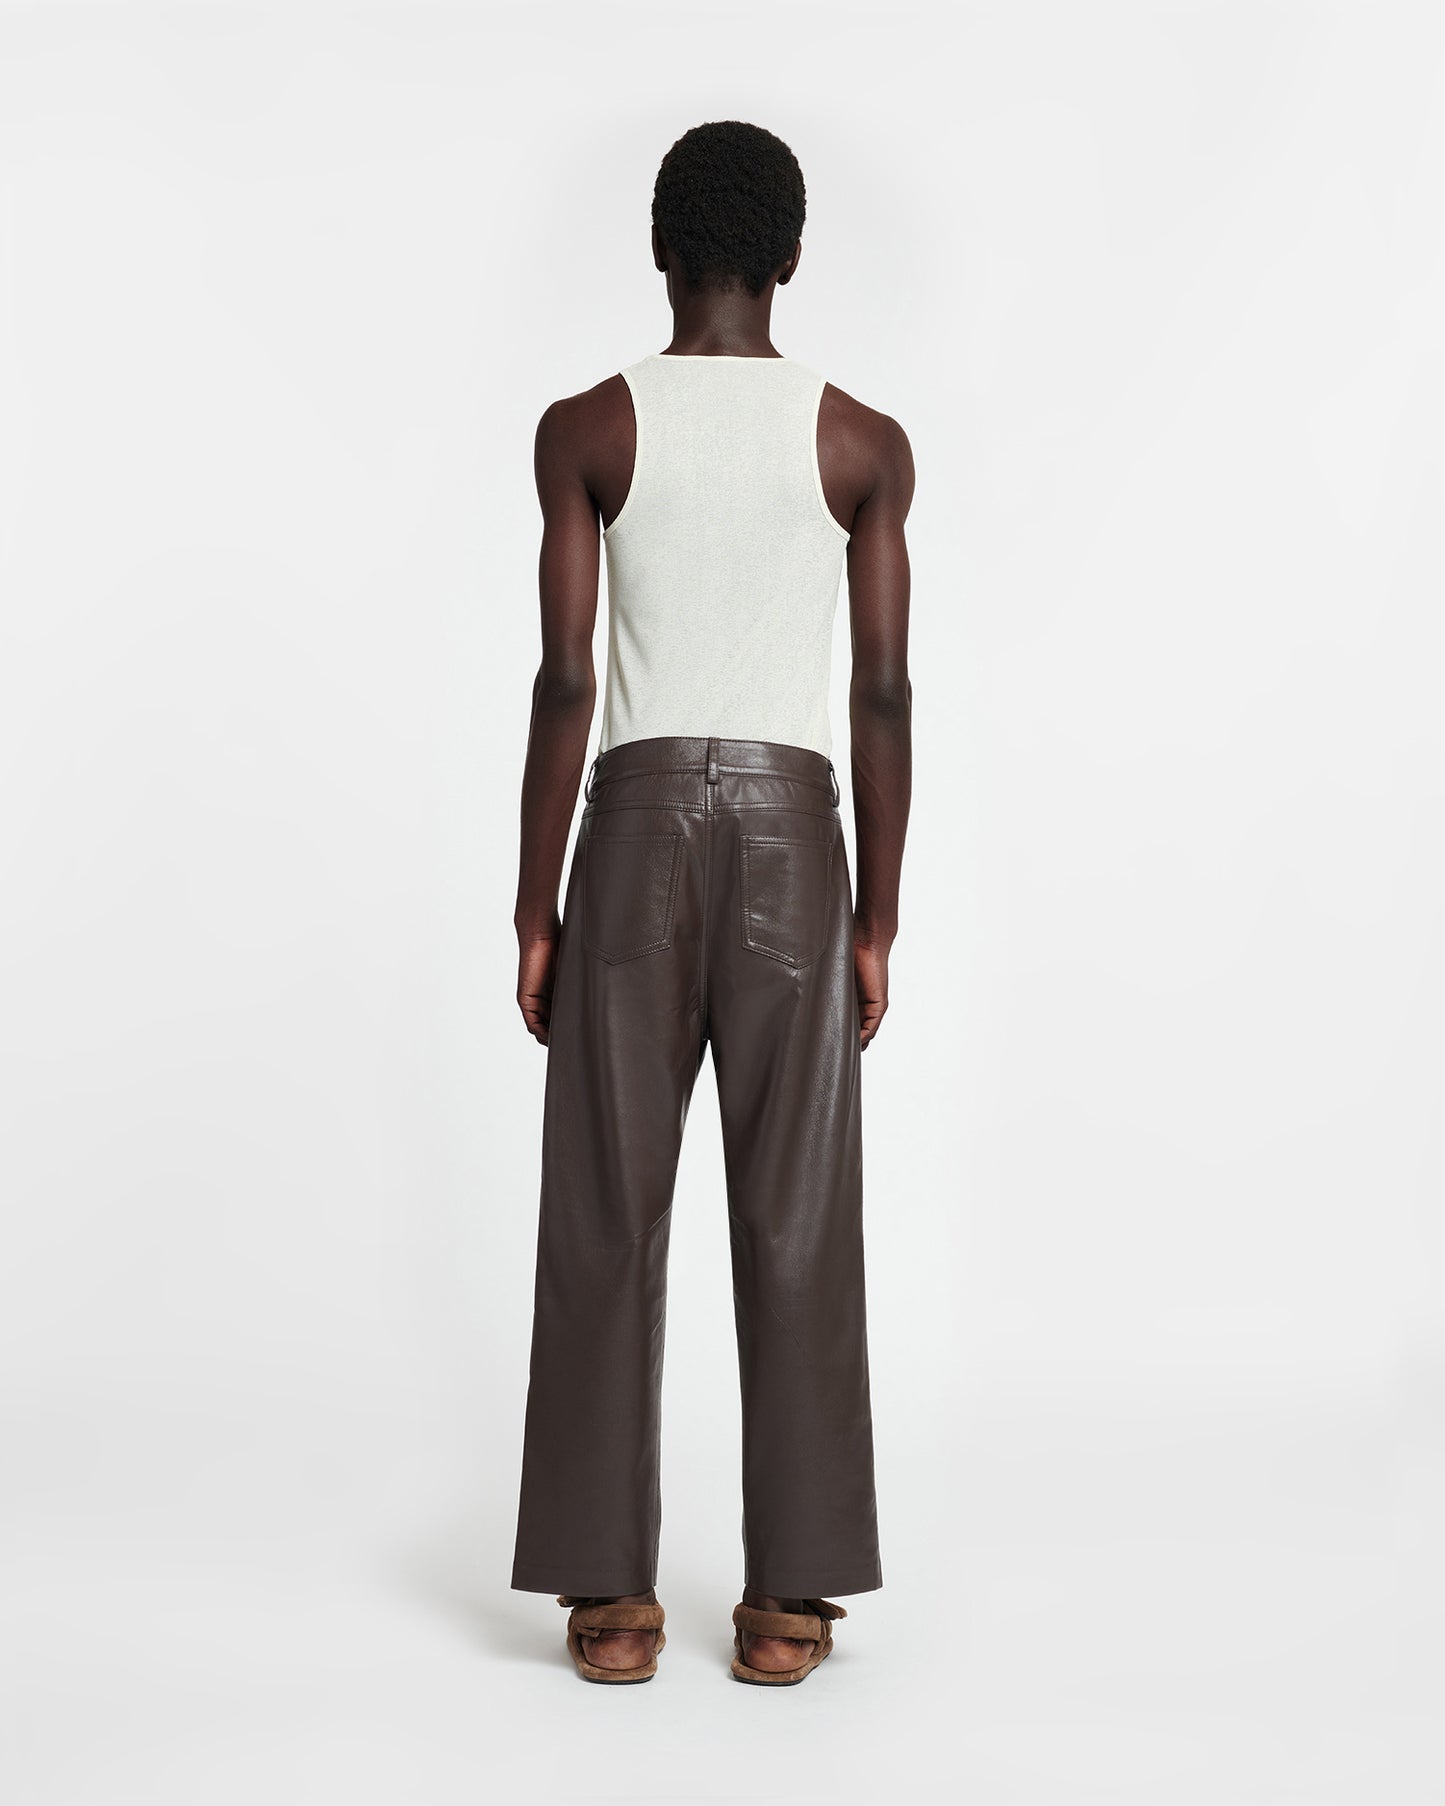 Quido - Regenerated Leather Pants - Coffee Bean